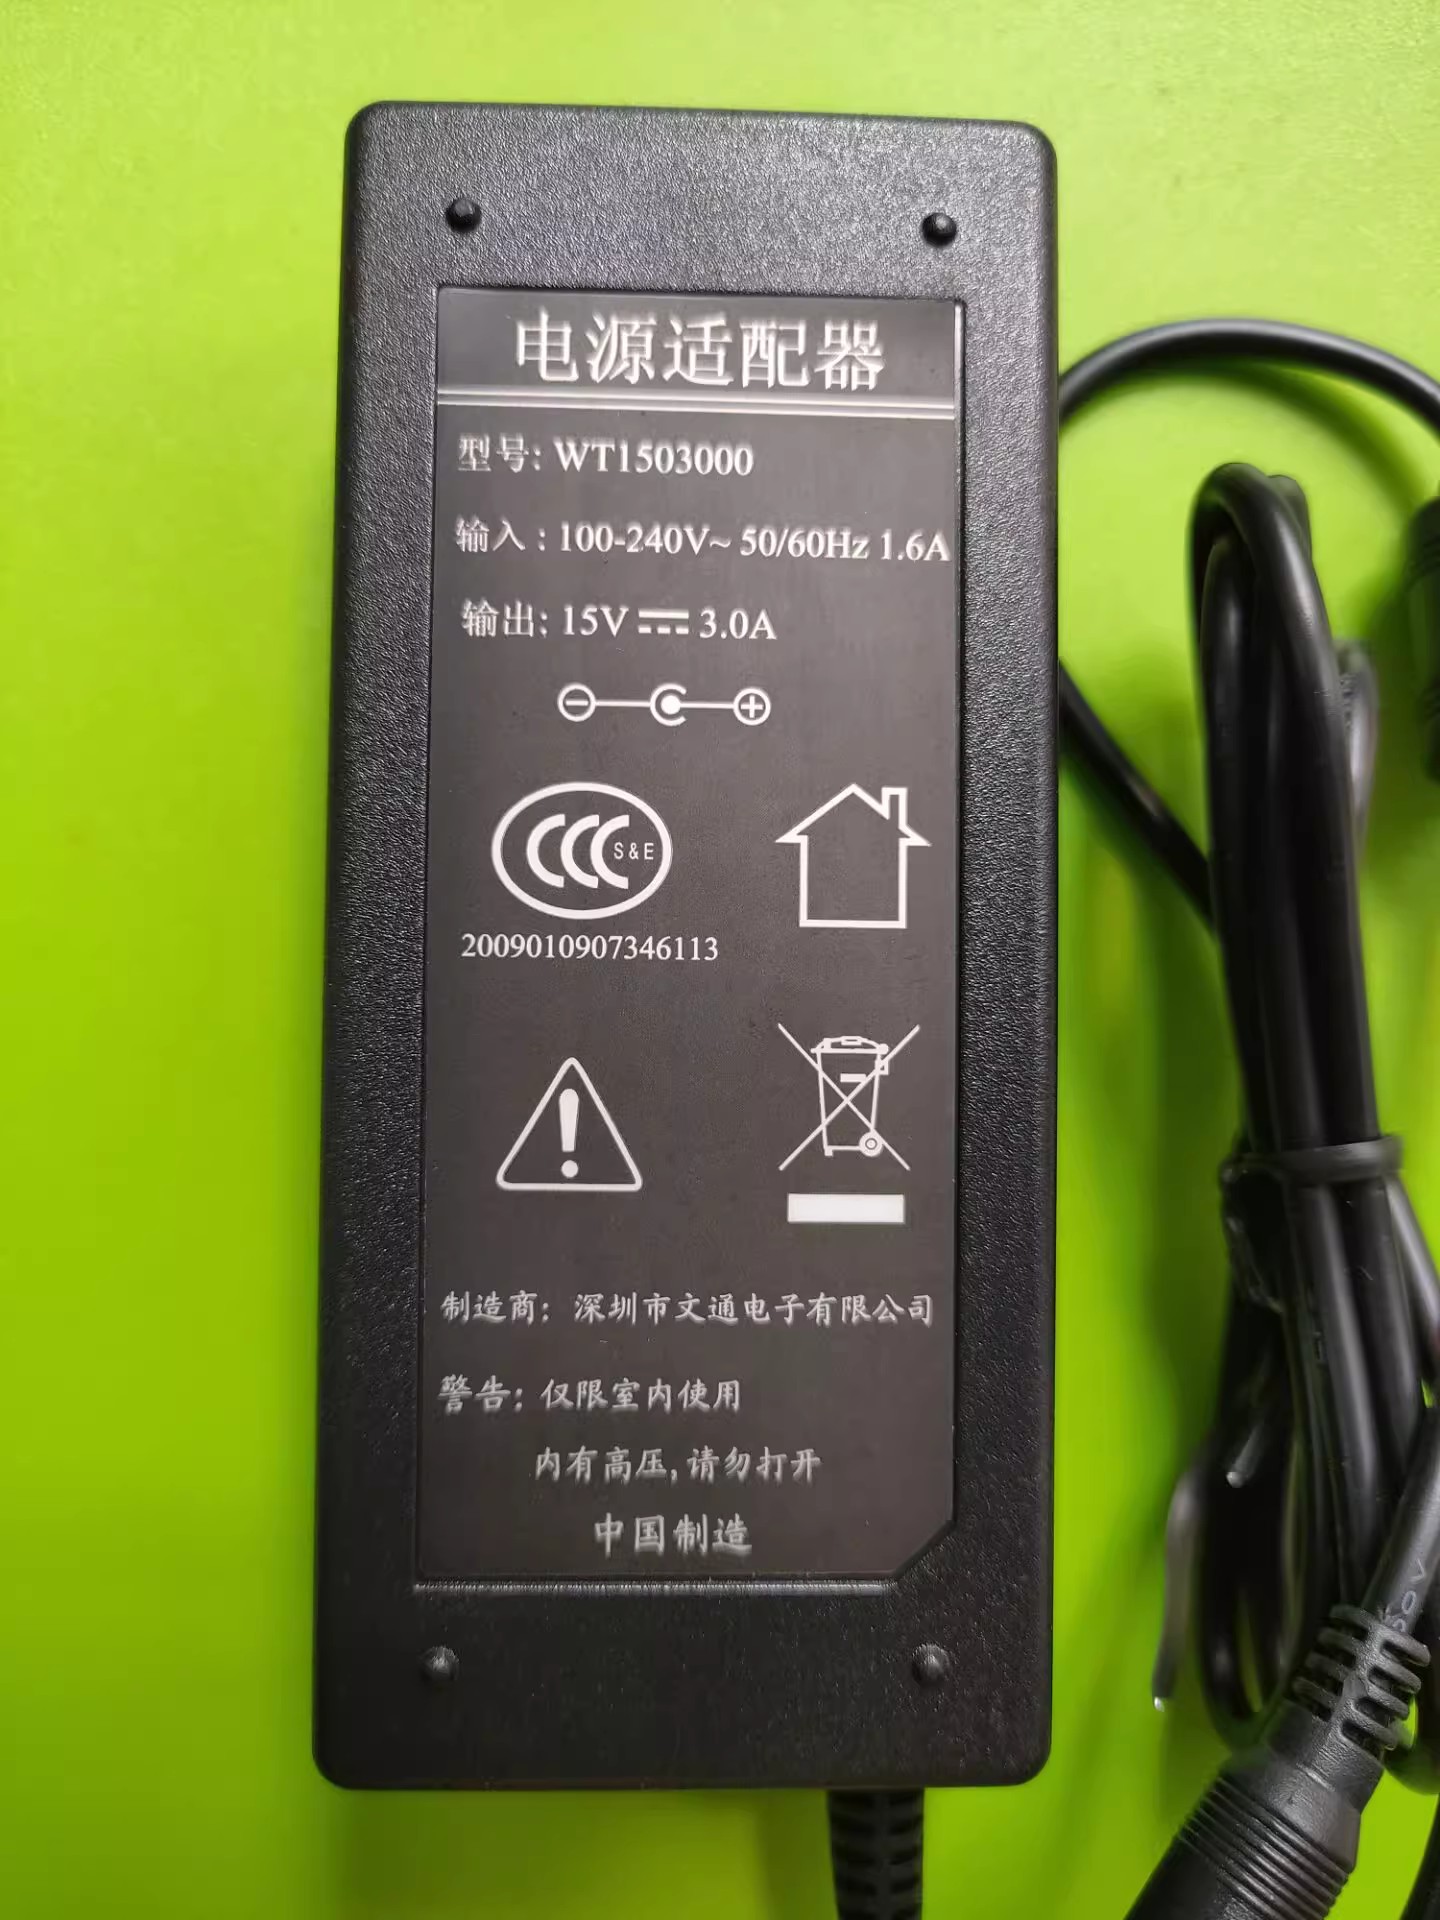 *Brand NEW* WT1503000 15V 3A AC DC ADAPTHE POWER Supply